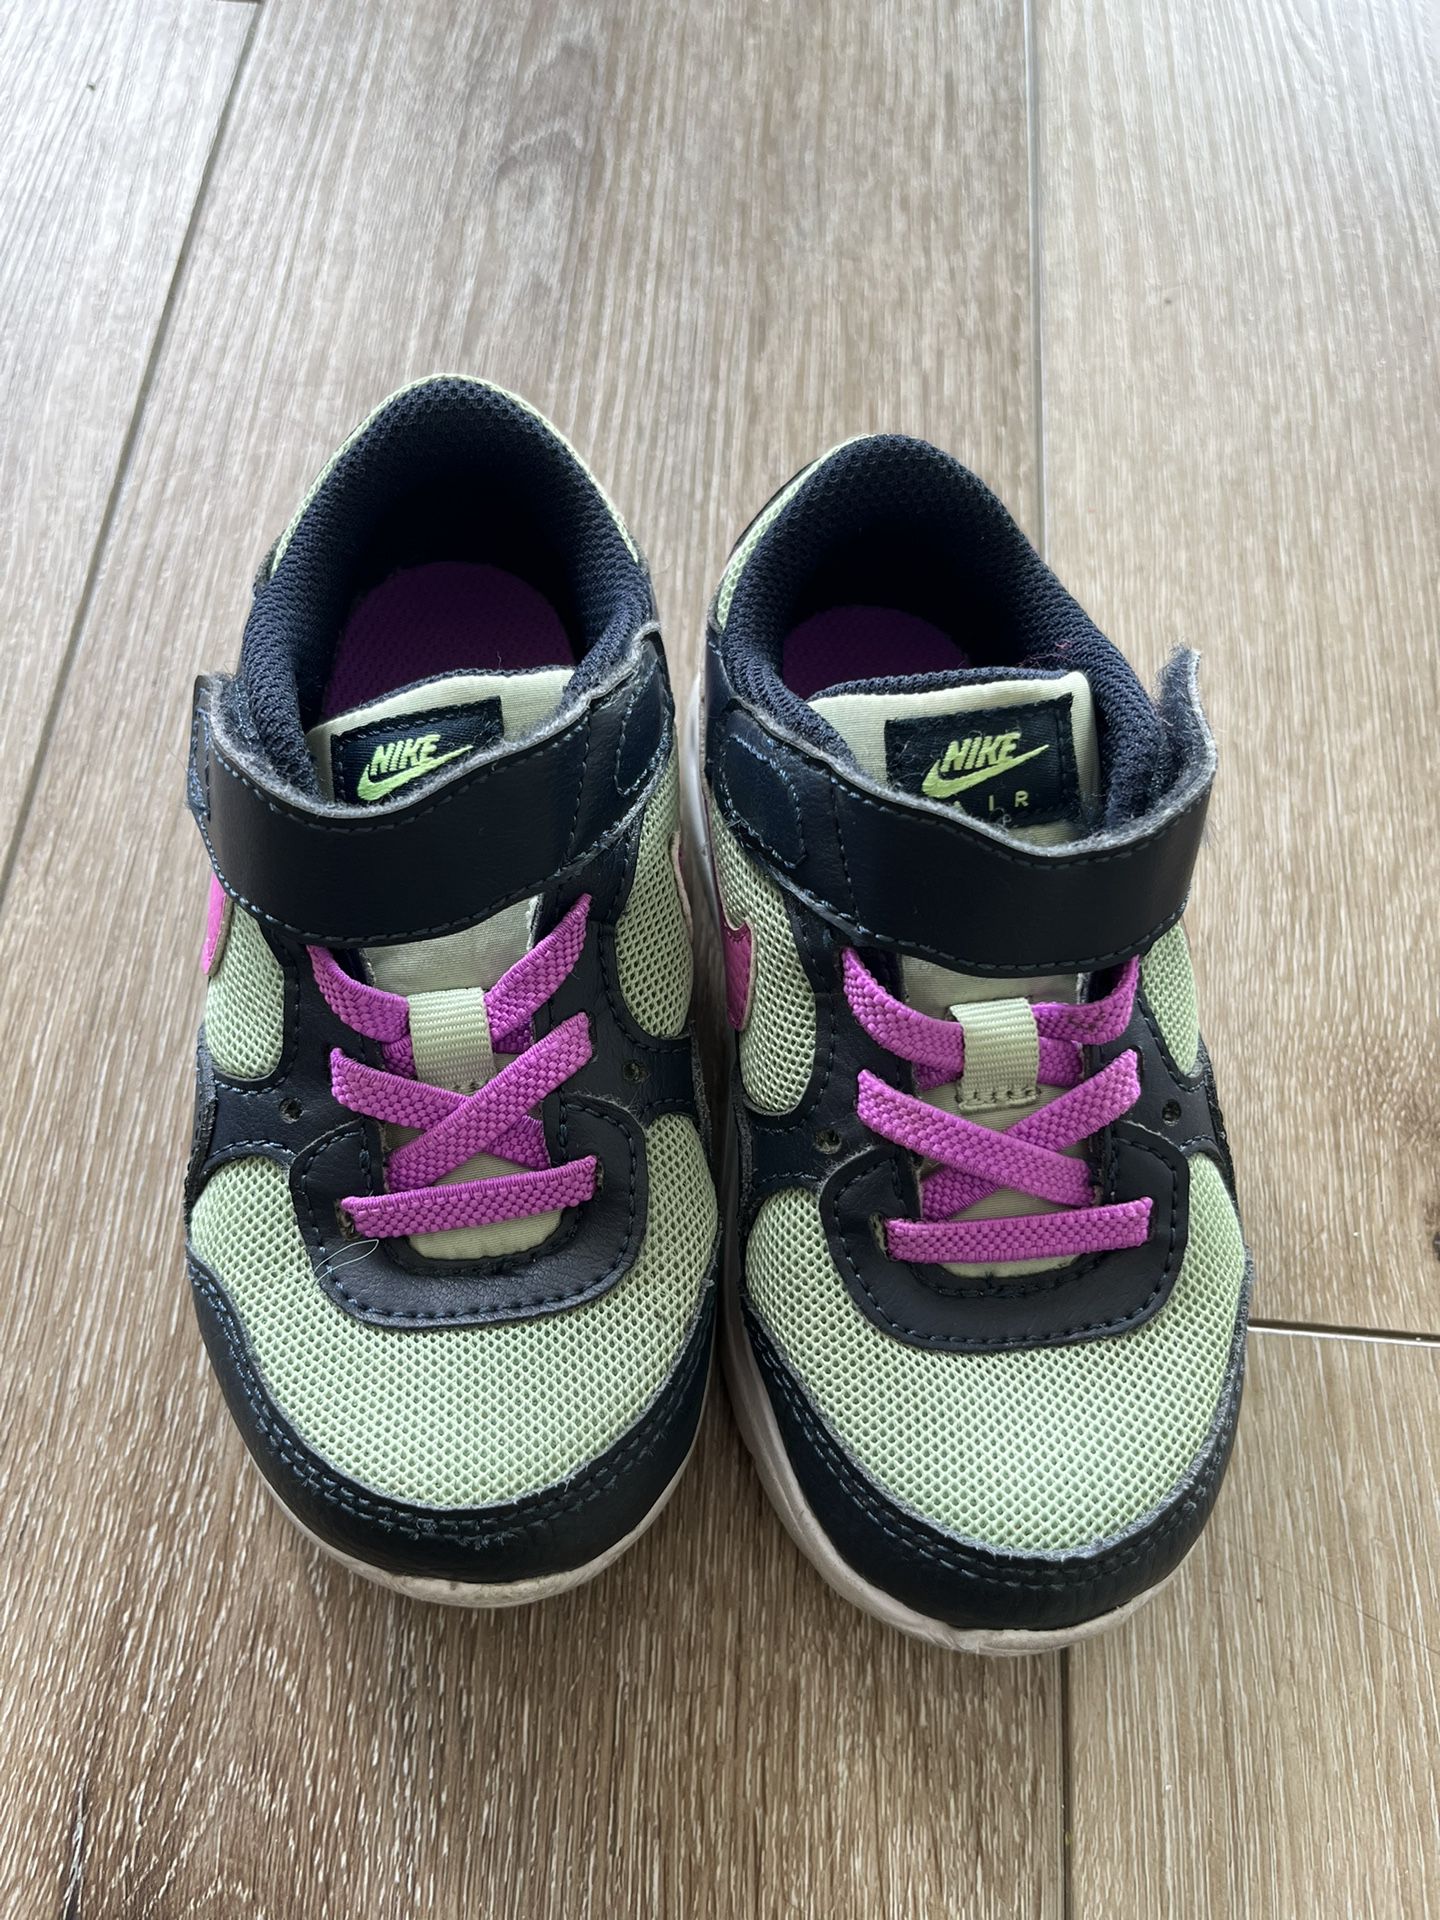 Nike Air Toddler Shoes Sneakers Size 8C